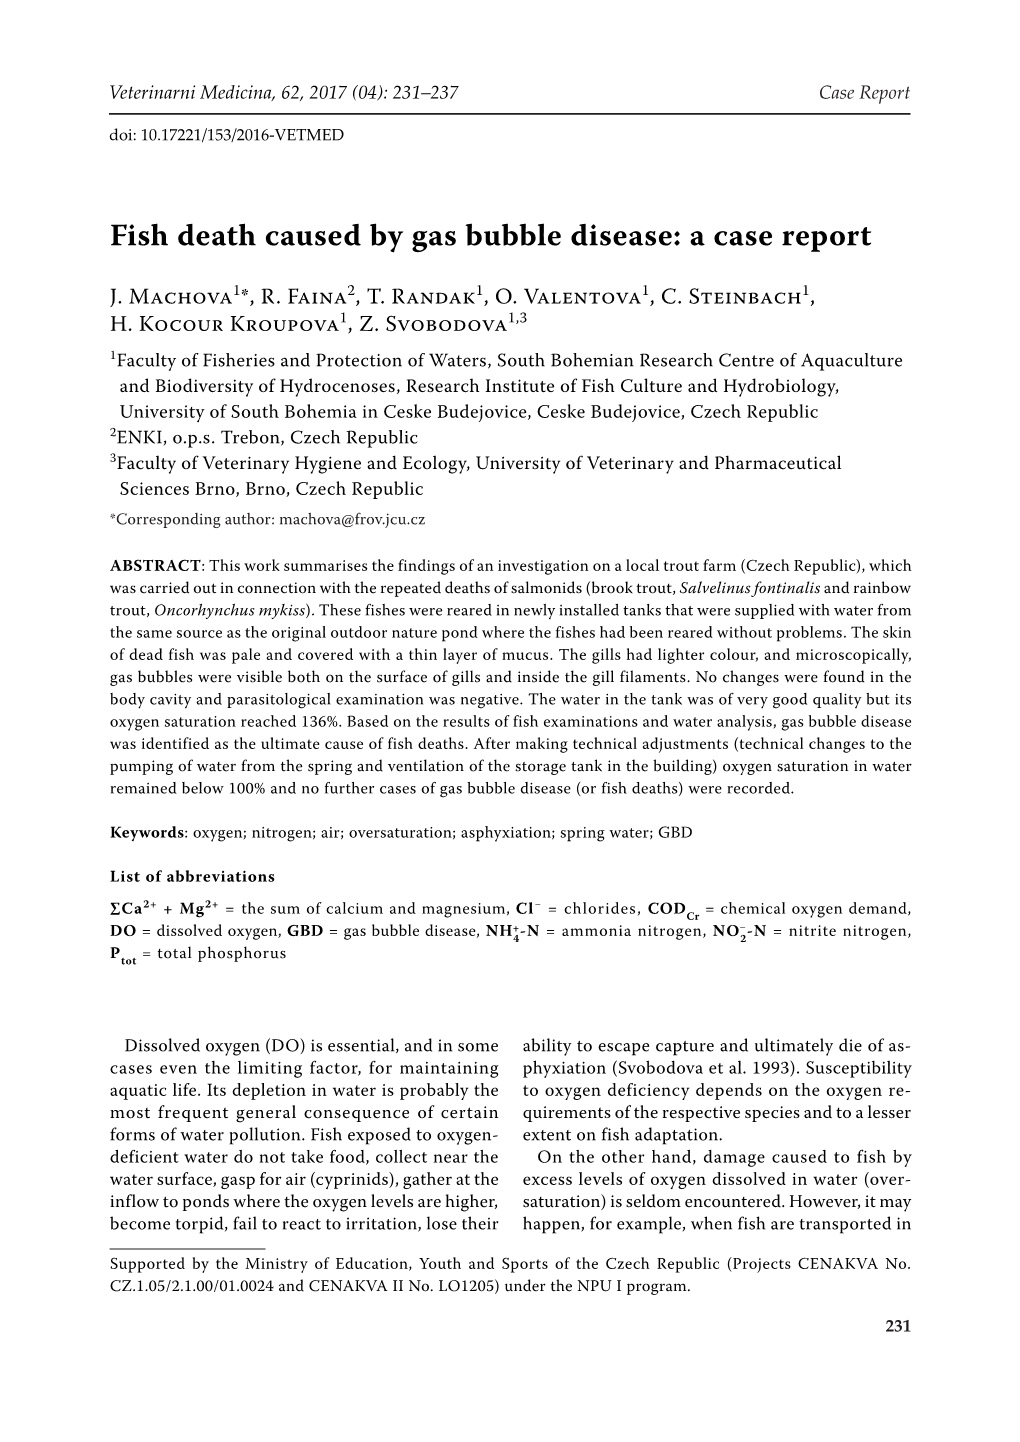 Fish Death Caused by Gas Bubble Disease: a Case Report